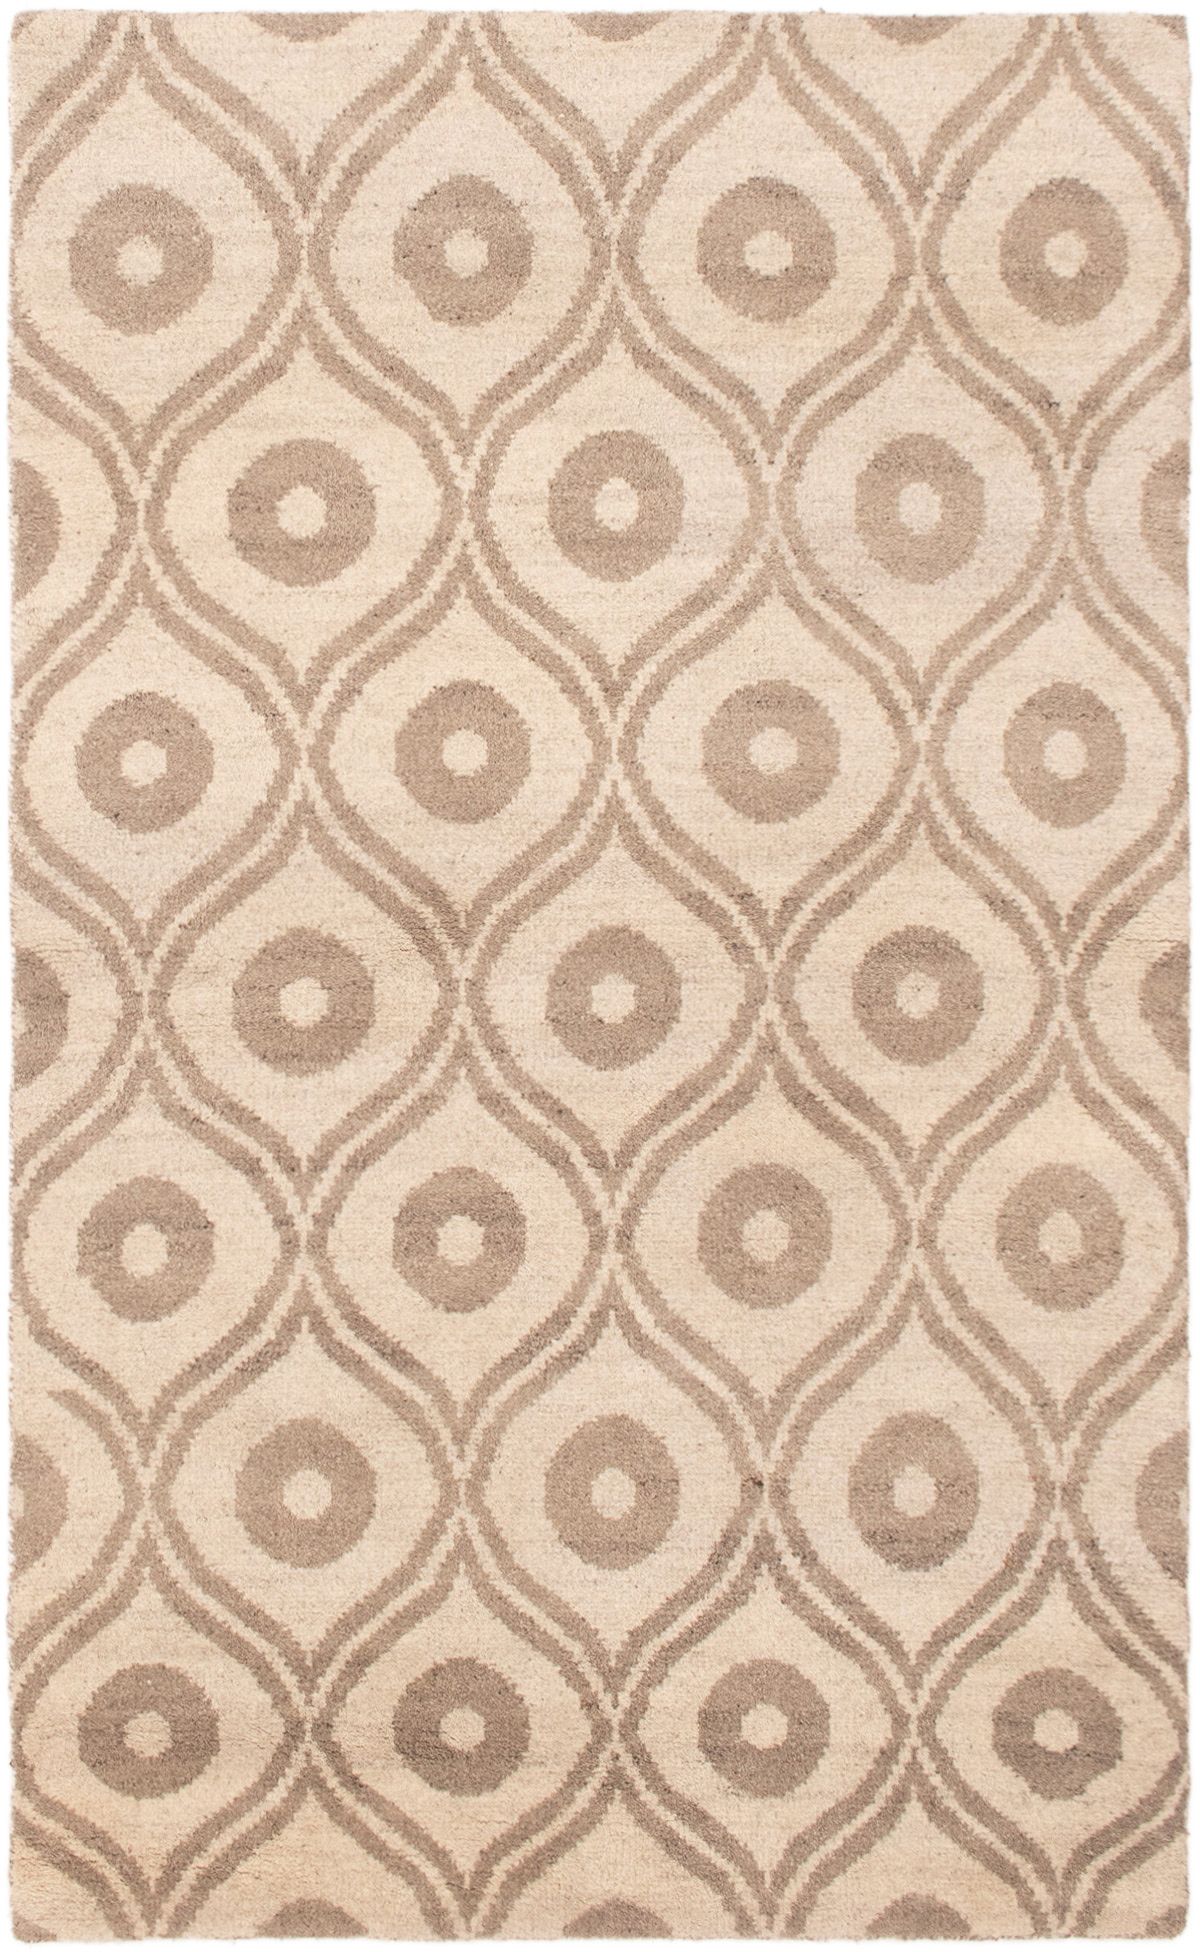 Hand-knotted Tangier Cream Wool Rug 4'11" x 8'1" Size: 4'11" x 8'1"  